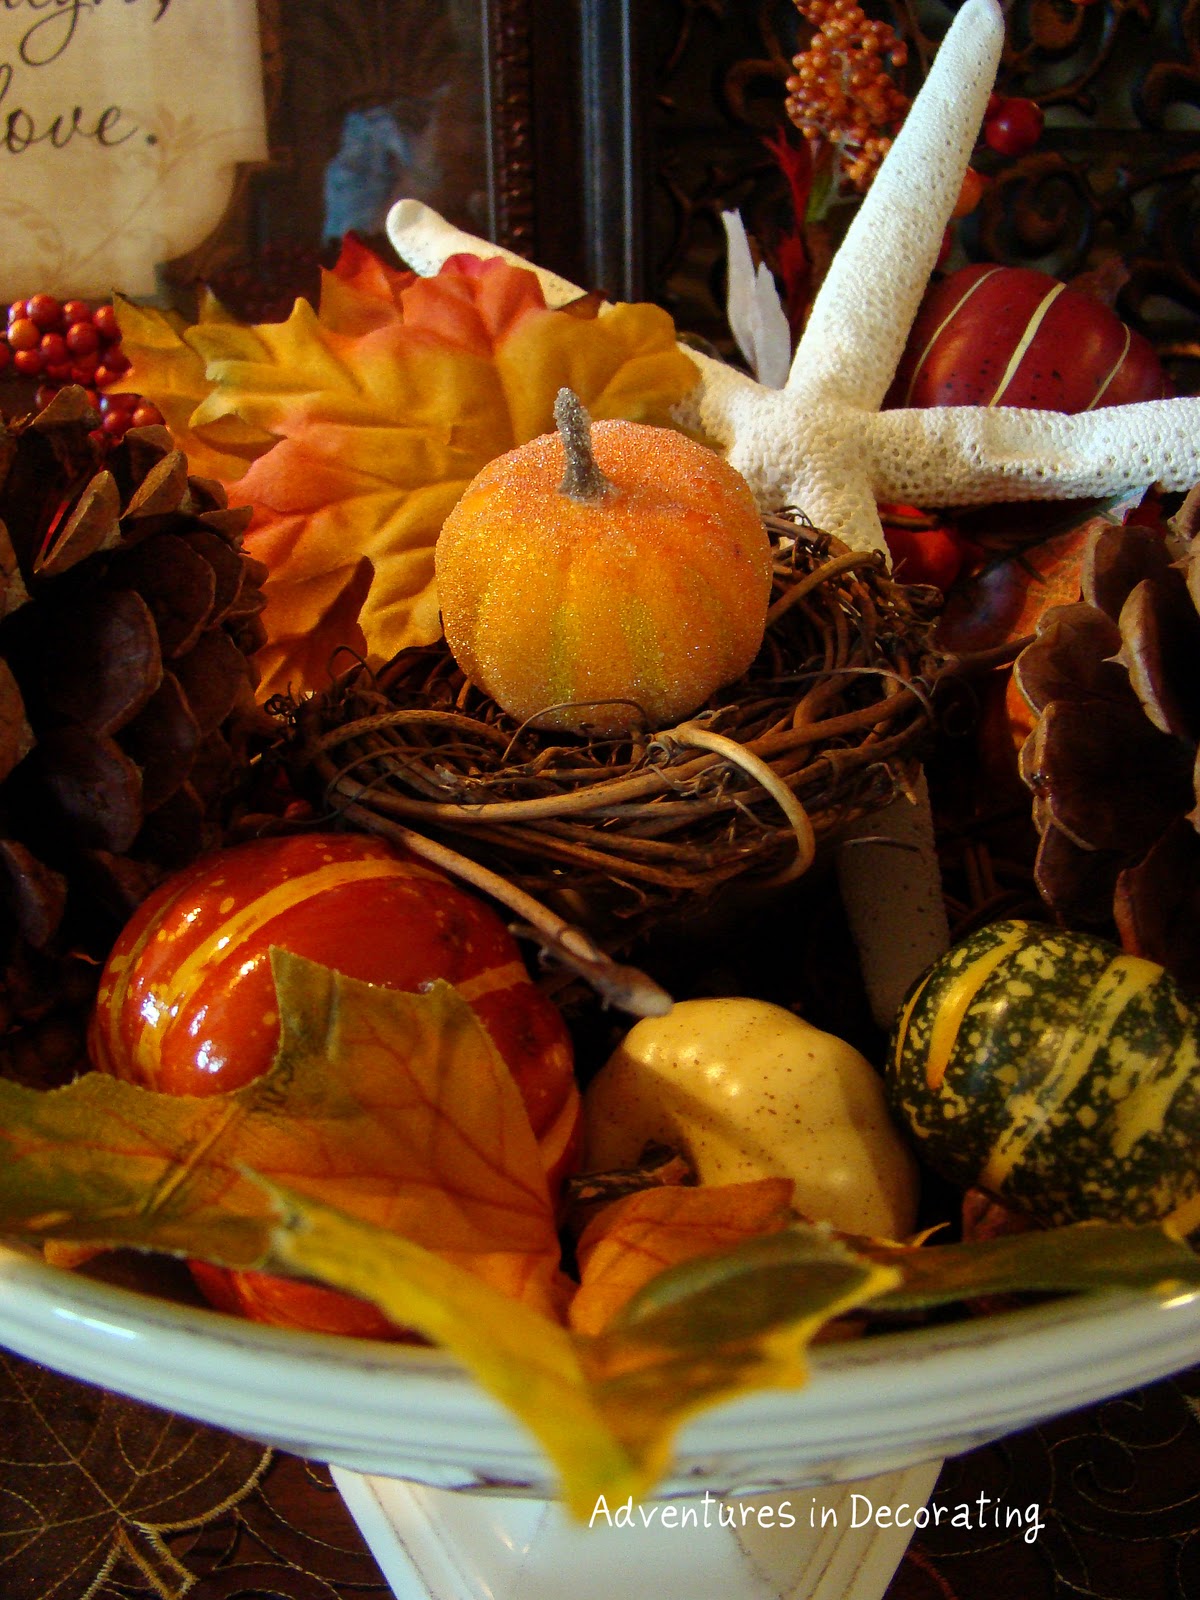 Adventures in Decorating: Fall Buffet